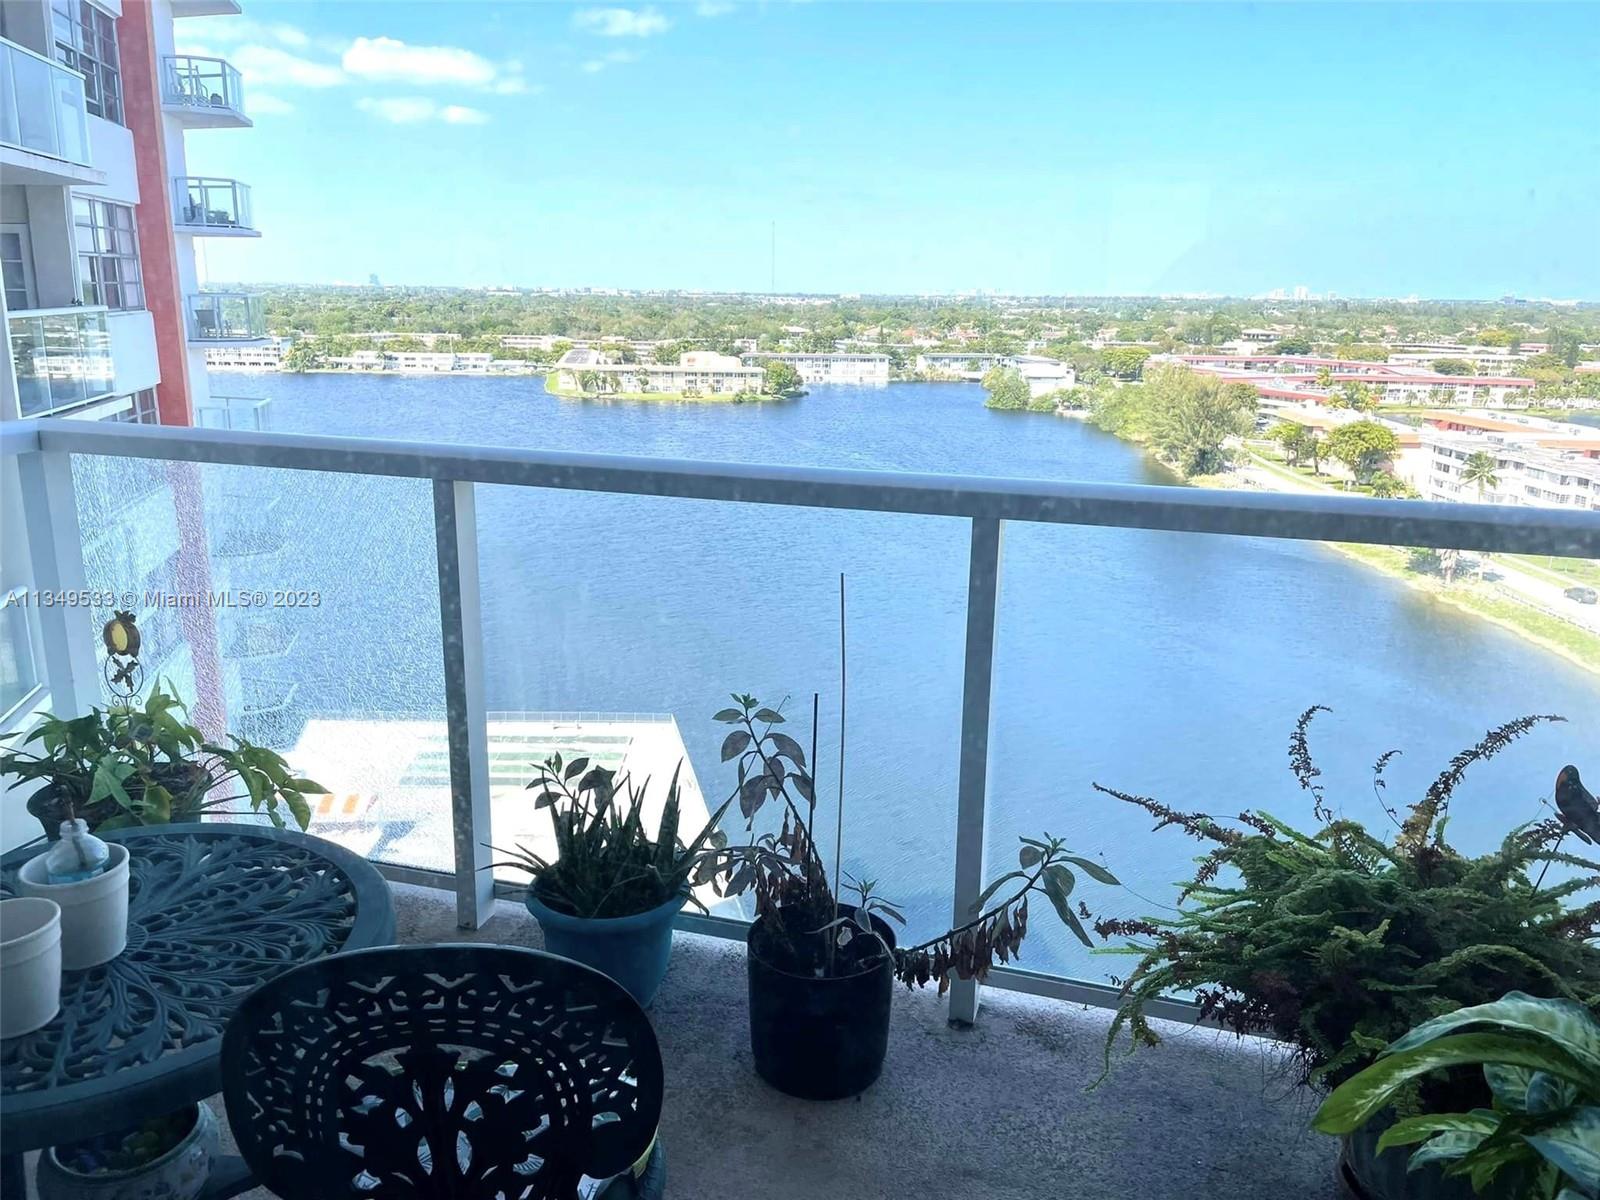 a view of a balcony with lake view and a potted plant